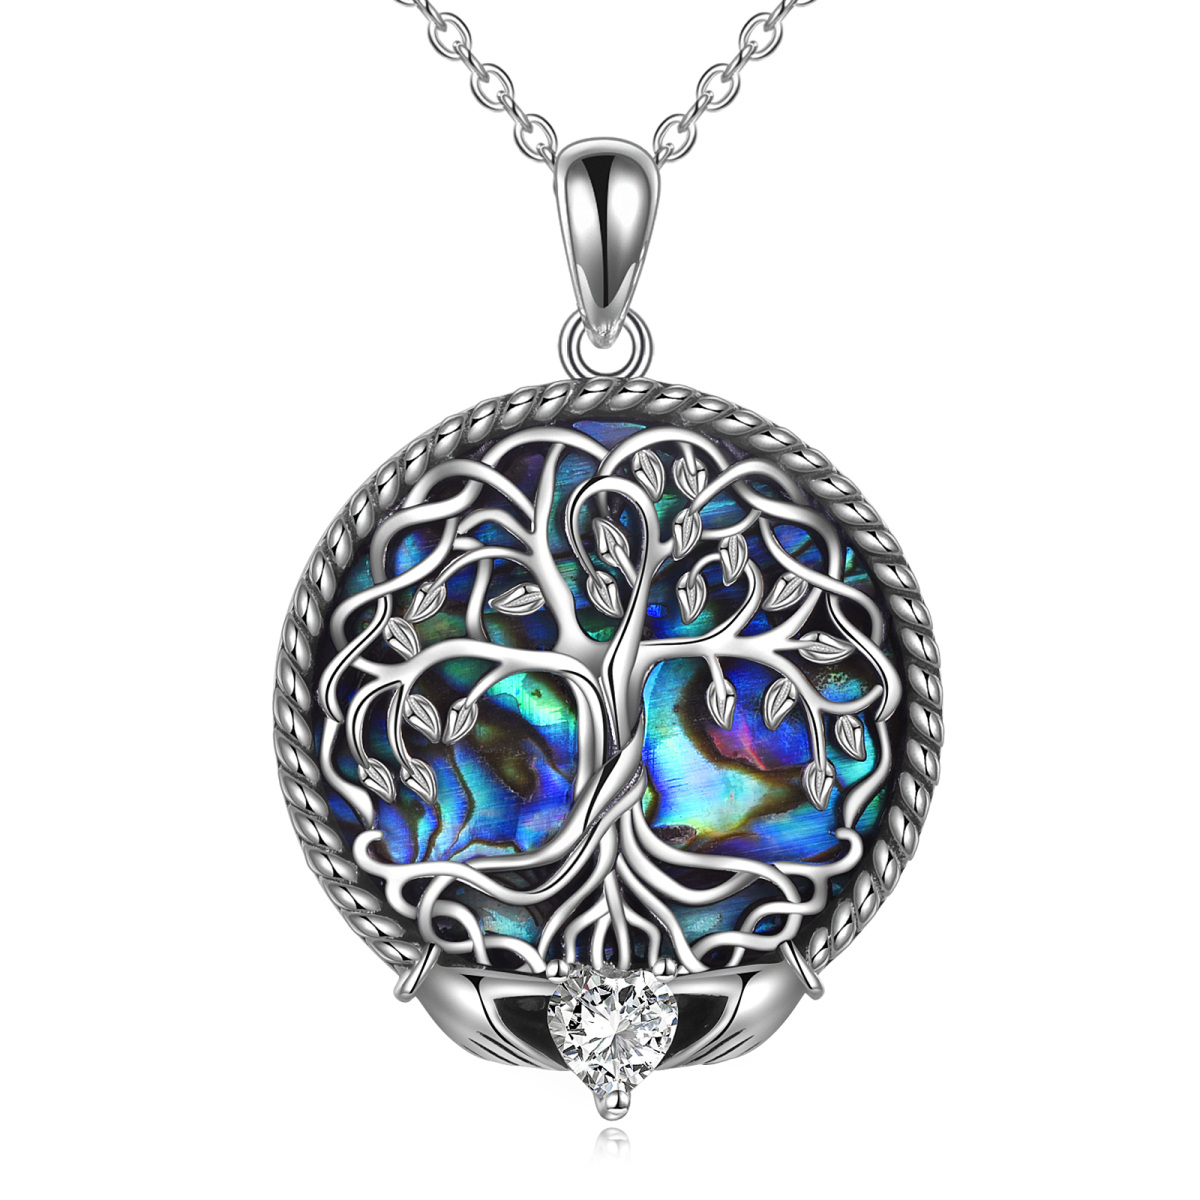 Collier en argent sterling avec pendentif Abalone Shellfish Tree Of Life & Claddagh-1